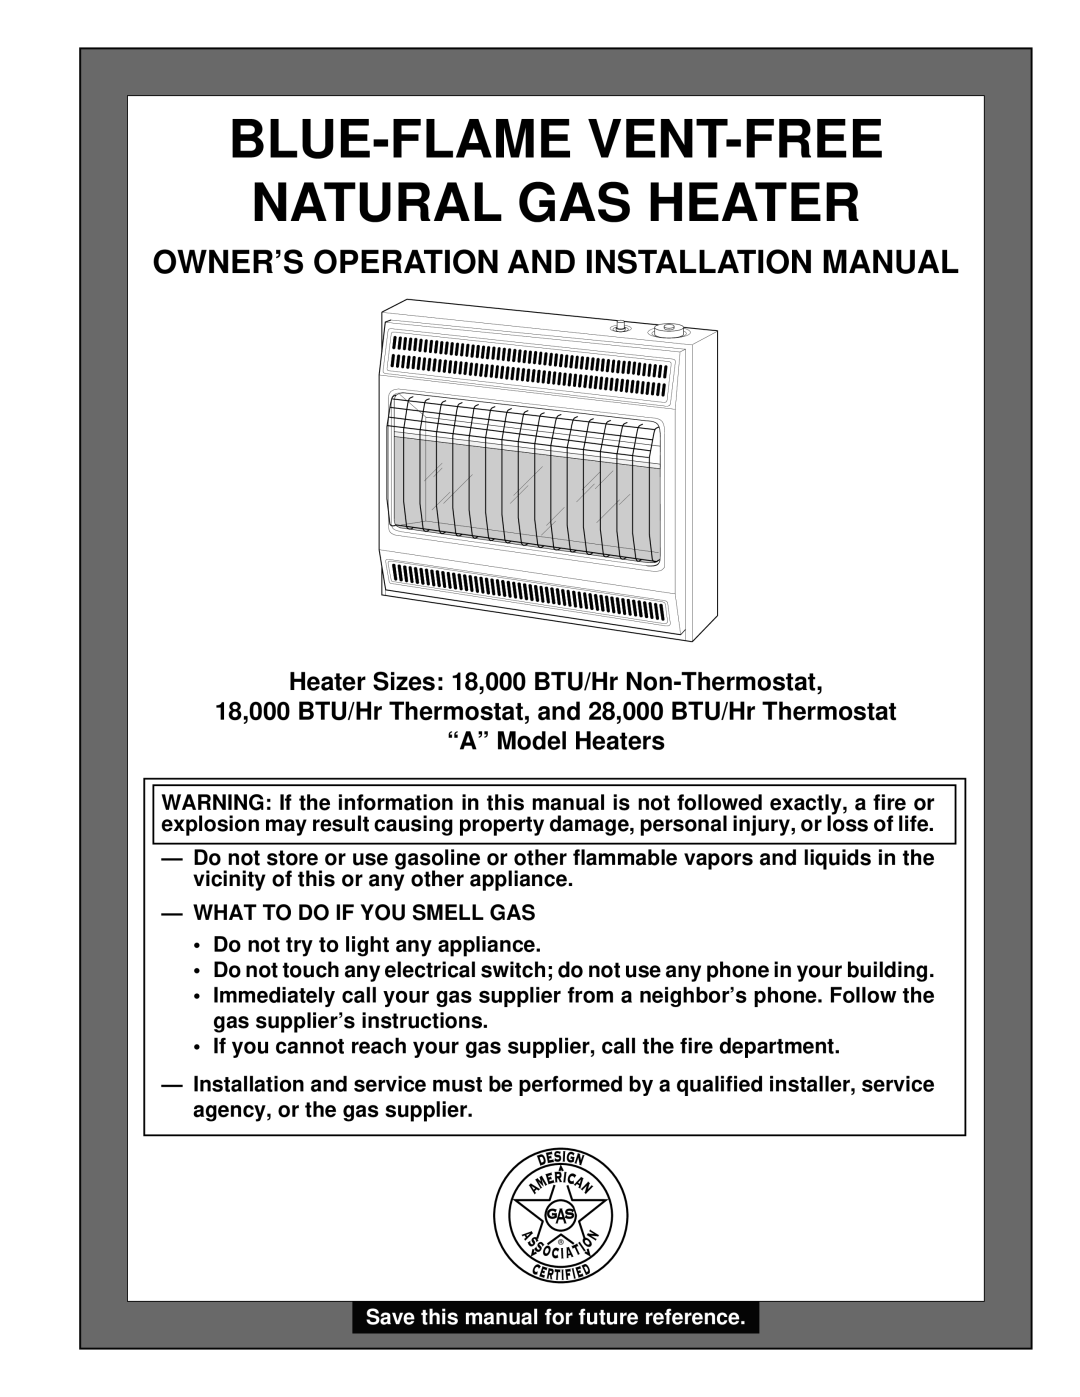 Desa installation manual Owner’S Operation And Installation Manual, Heater Sizes 18,000 BTU/Hr Non-Thermostat 